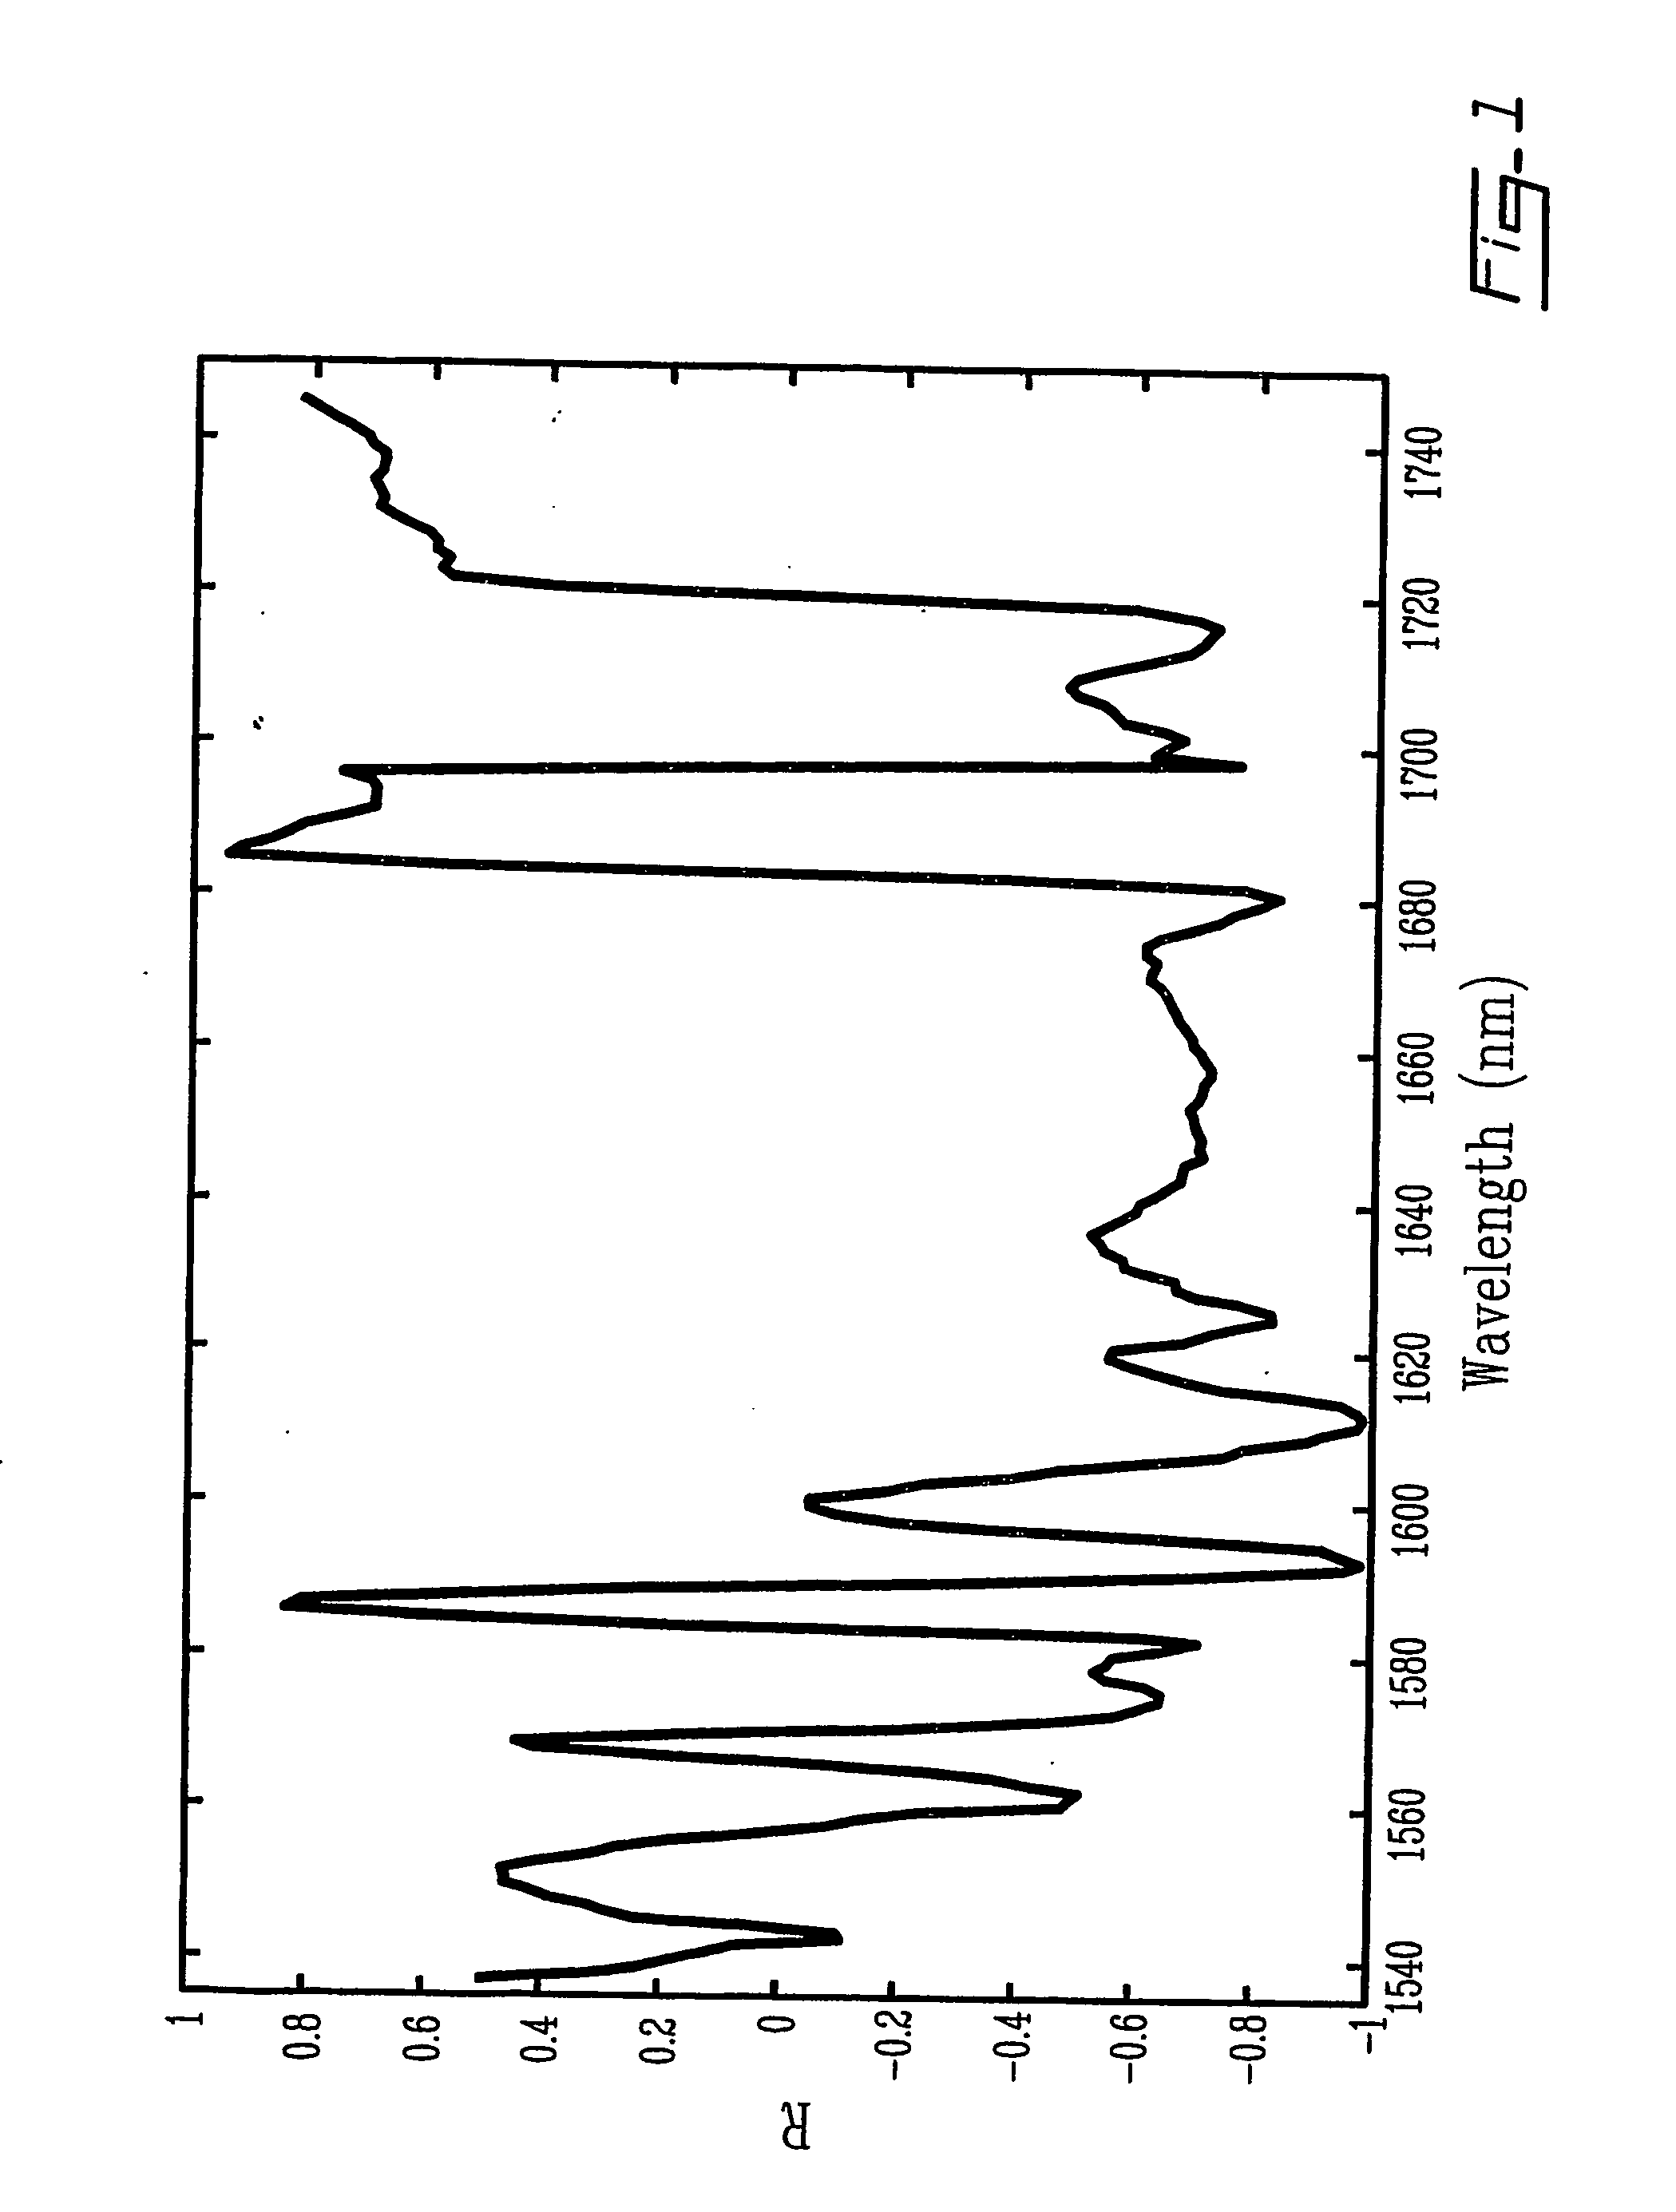 Method and system for measuring lactate levels in vivo